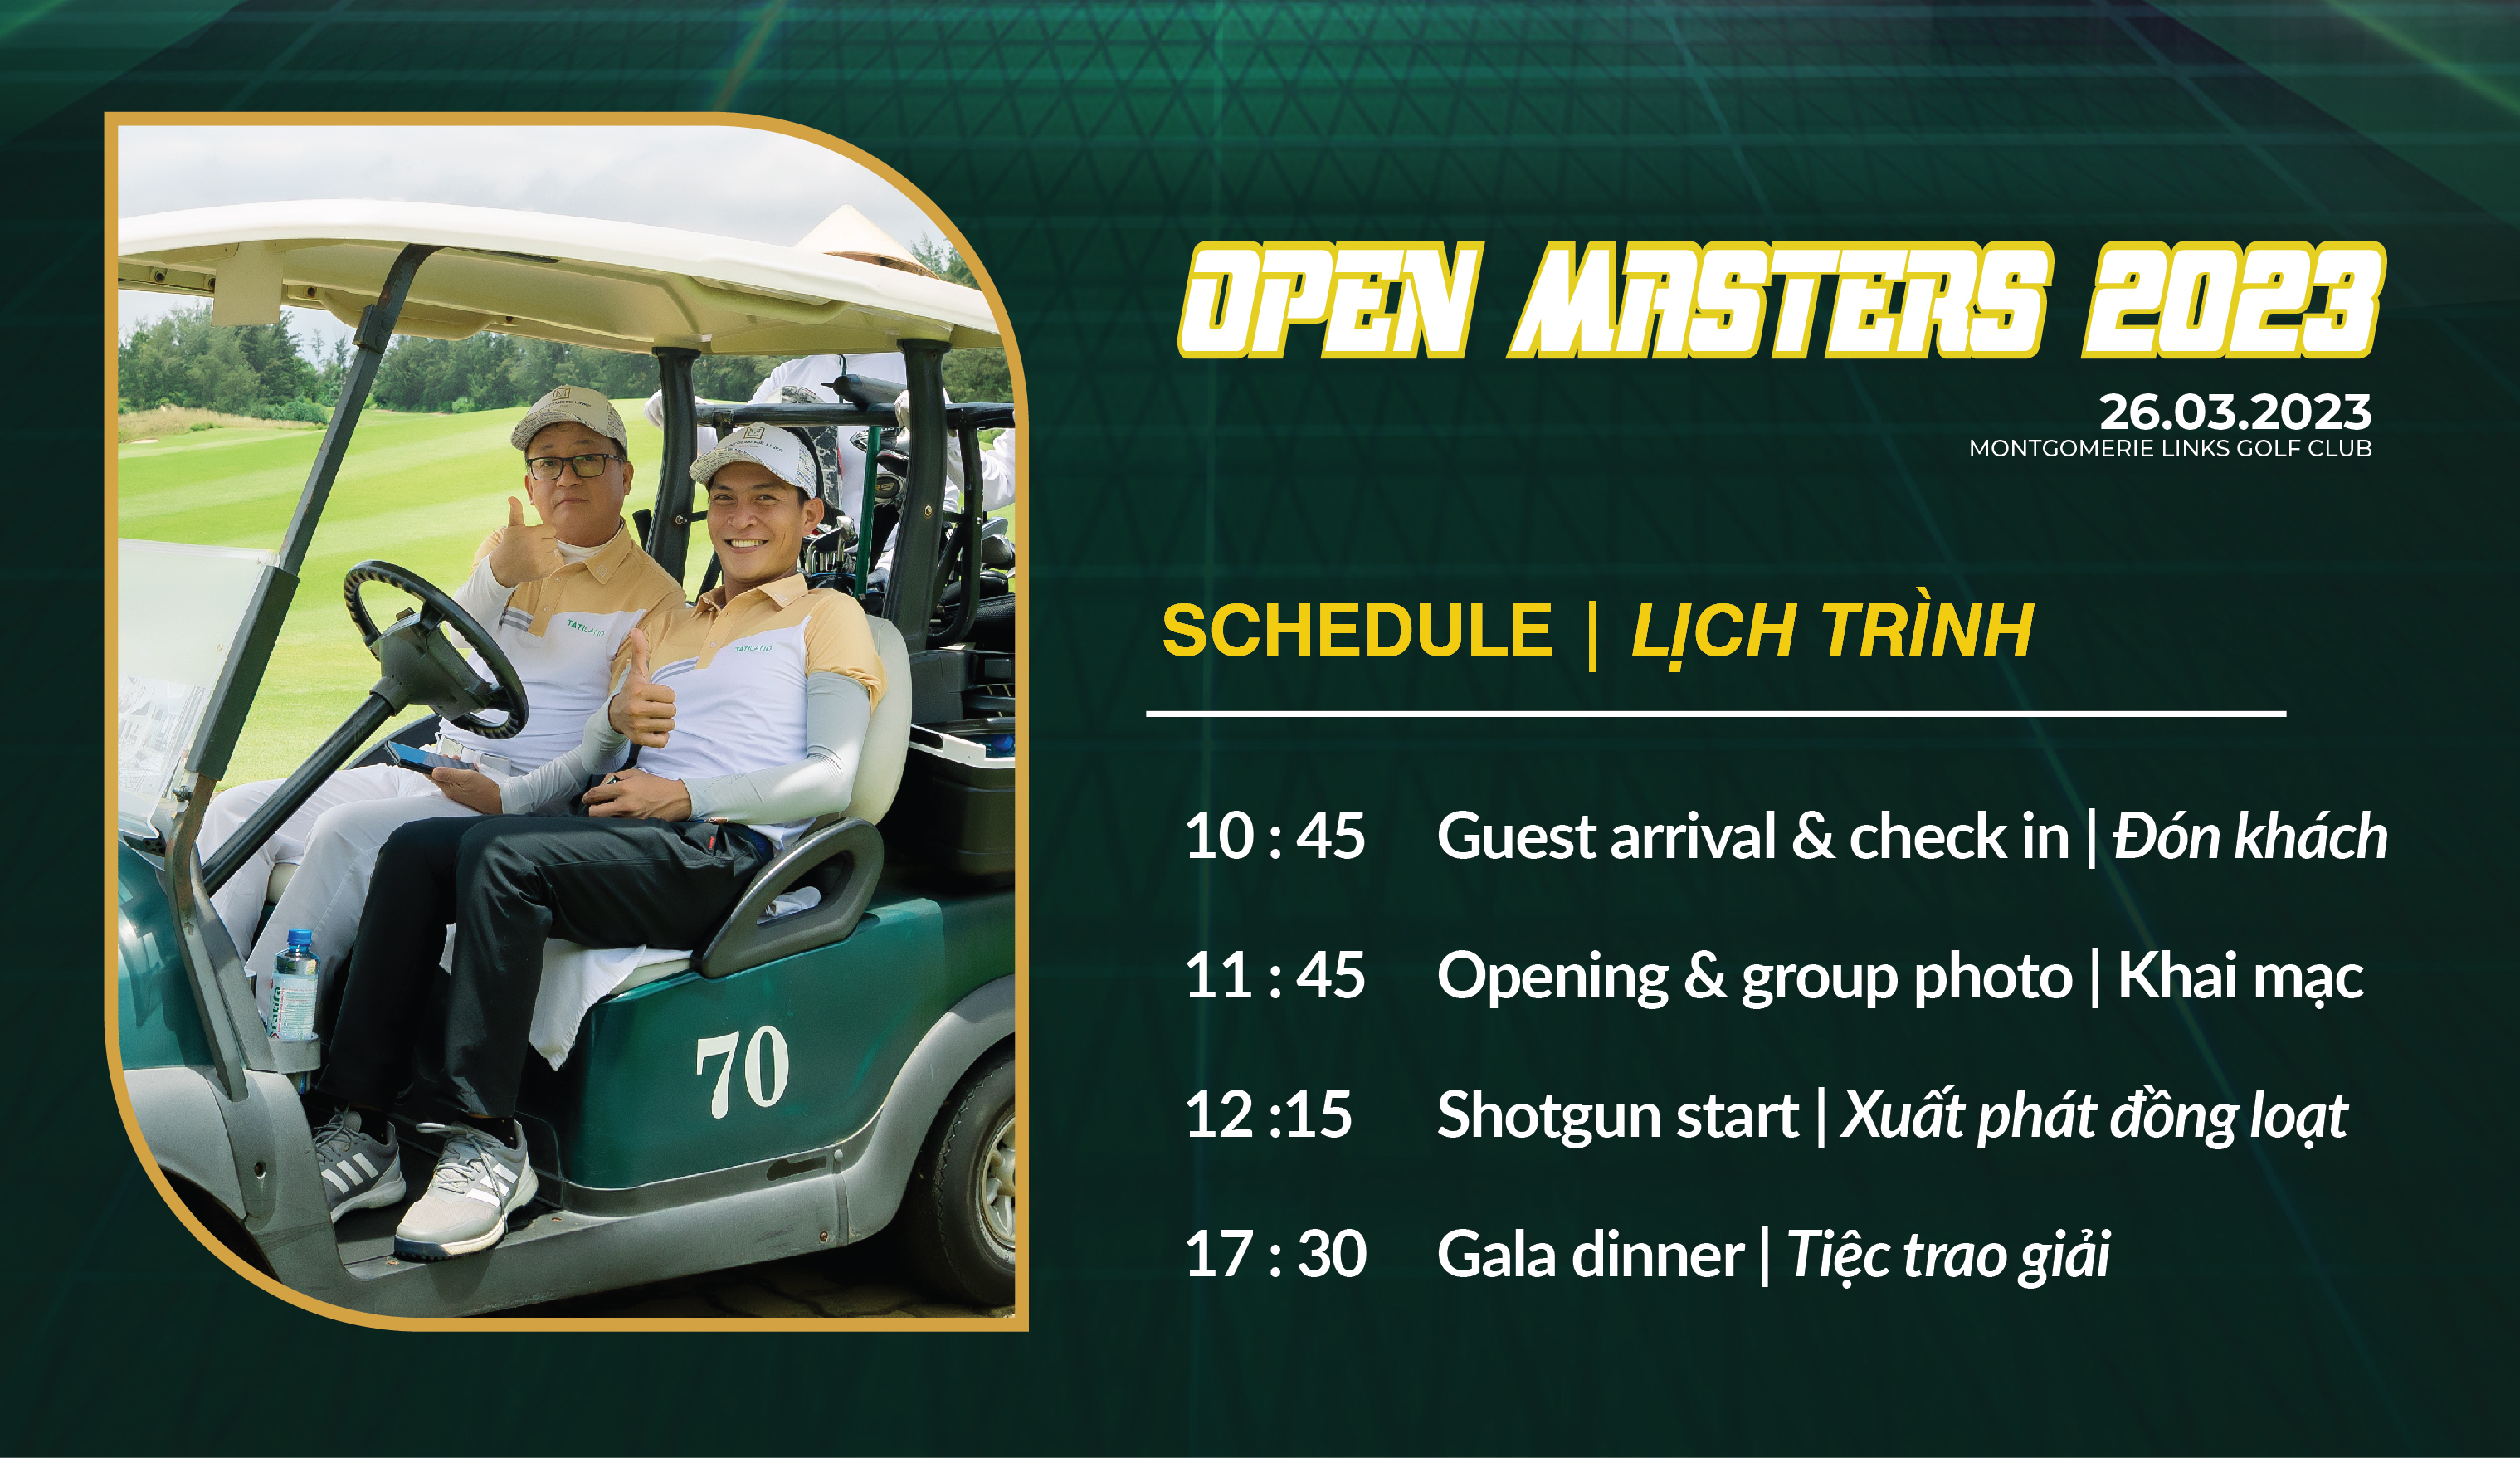 OPEN MASTERS TOURNAMENT 2023 IS BACK!